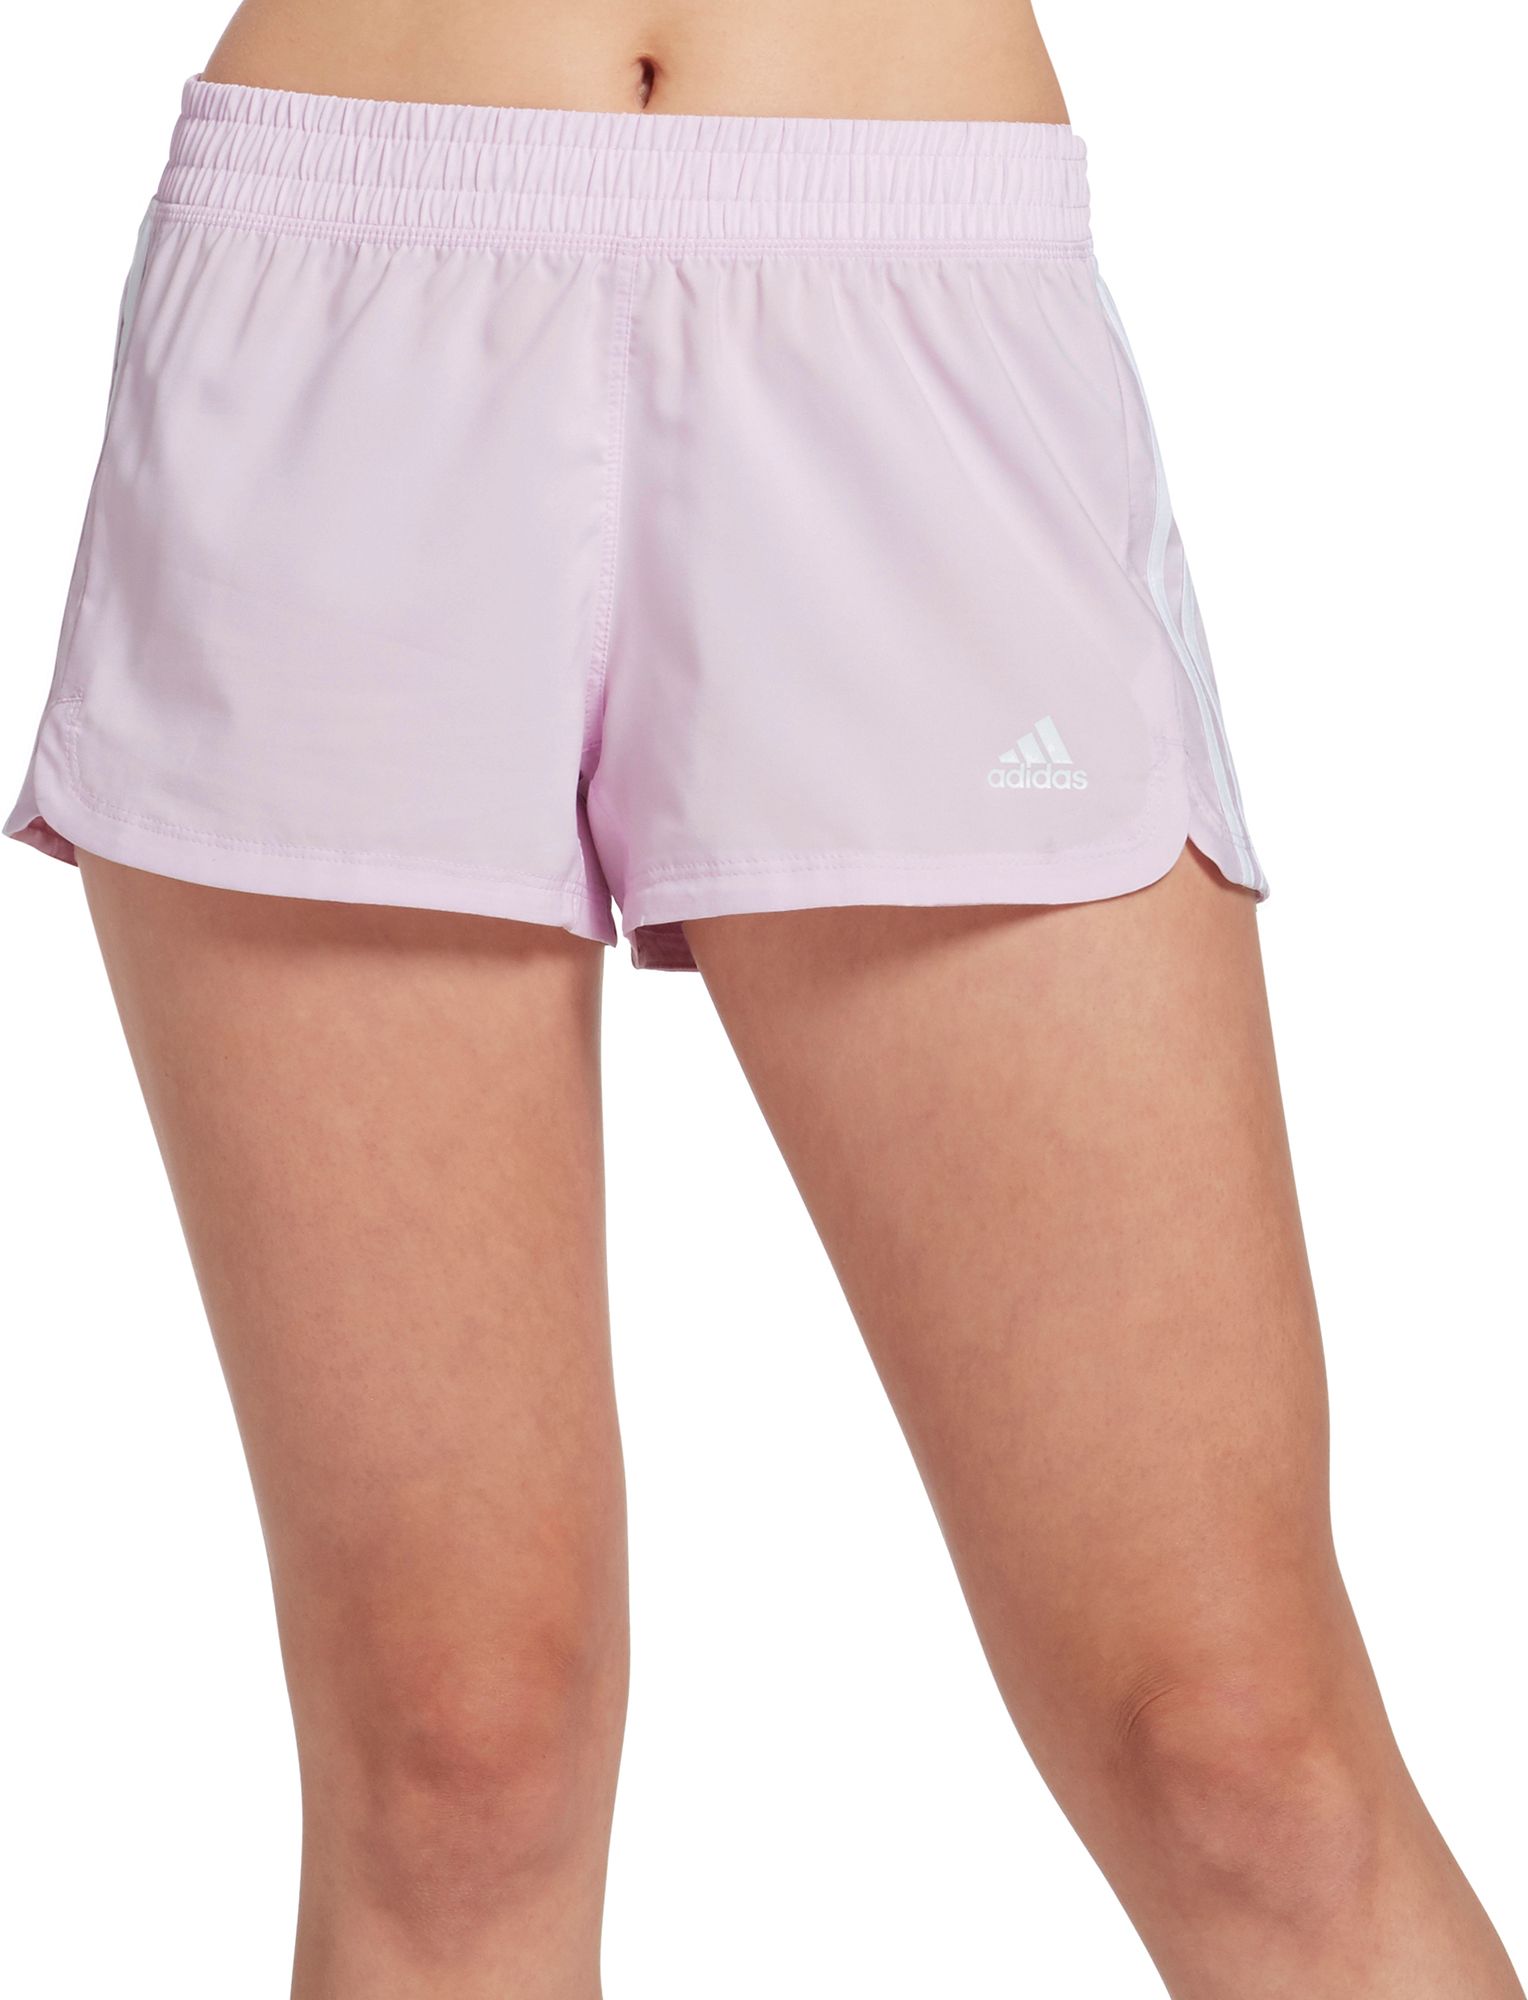 adidas 2 in 1 woven shorts ladies